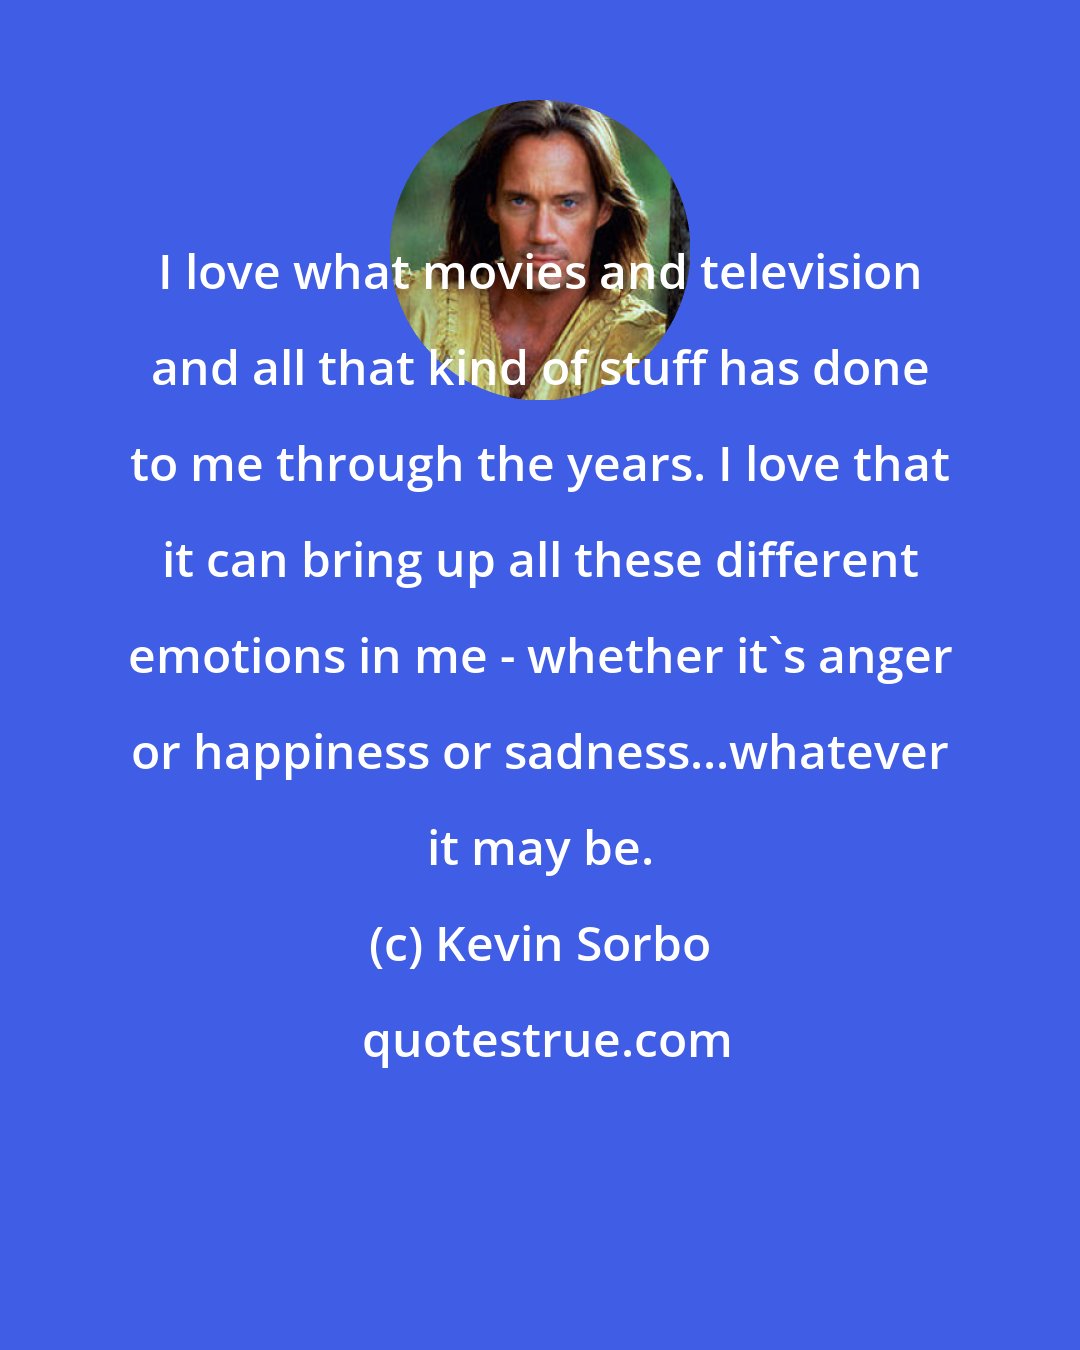 Kevin Sorbo: I love what movies and television and all that kind of stuff has done to me through the years. I love that it can bring up all these different emotions in me - whether it's anger or happiness or sadness...whatever it may be.